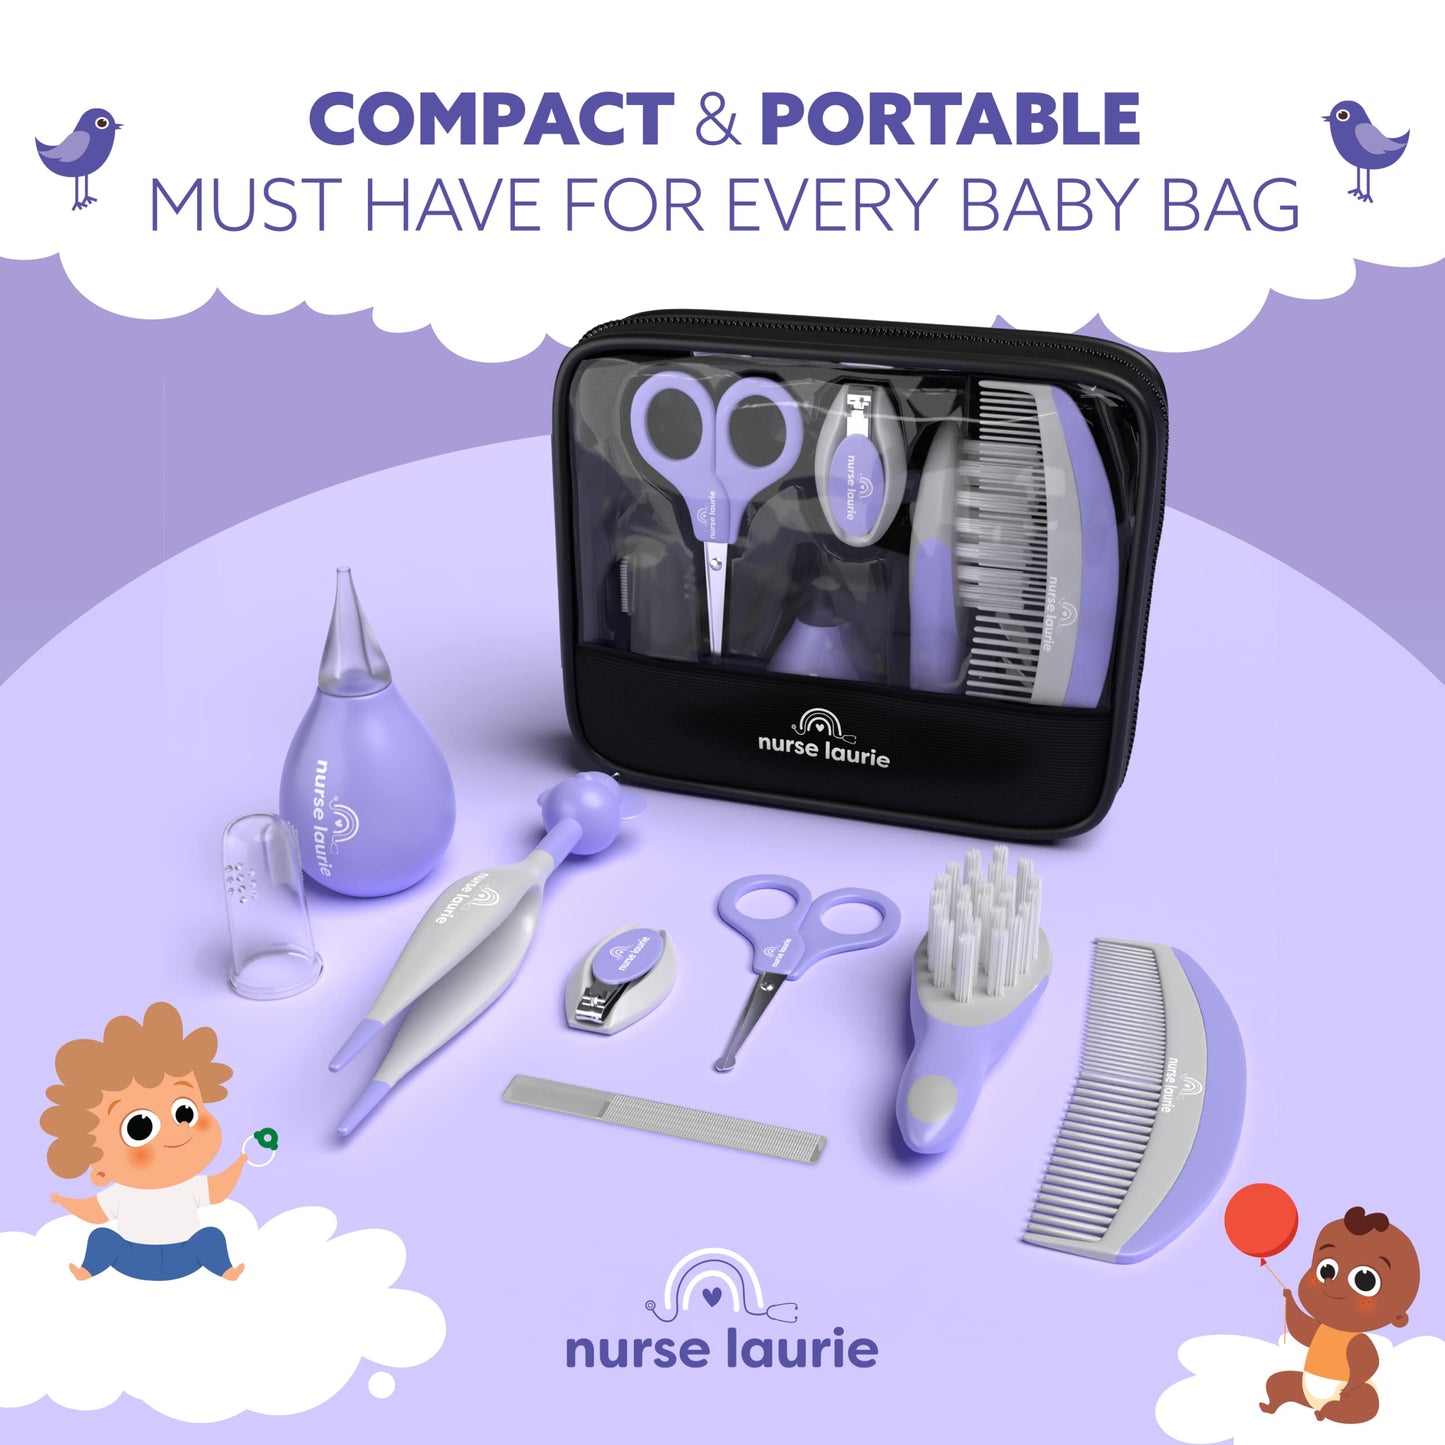 Deluxe 9-in-1 Baby Grooming Kit by Nurse Laurie – All-Inclusive, Hospital-Grade, Travel-Ready - Lavender Purple